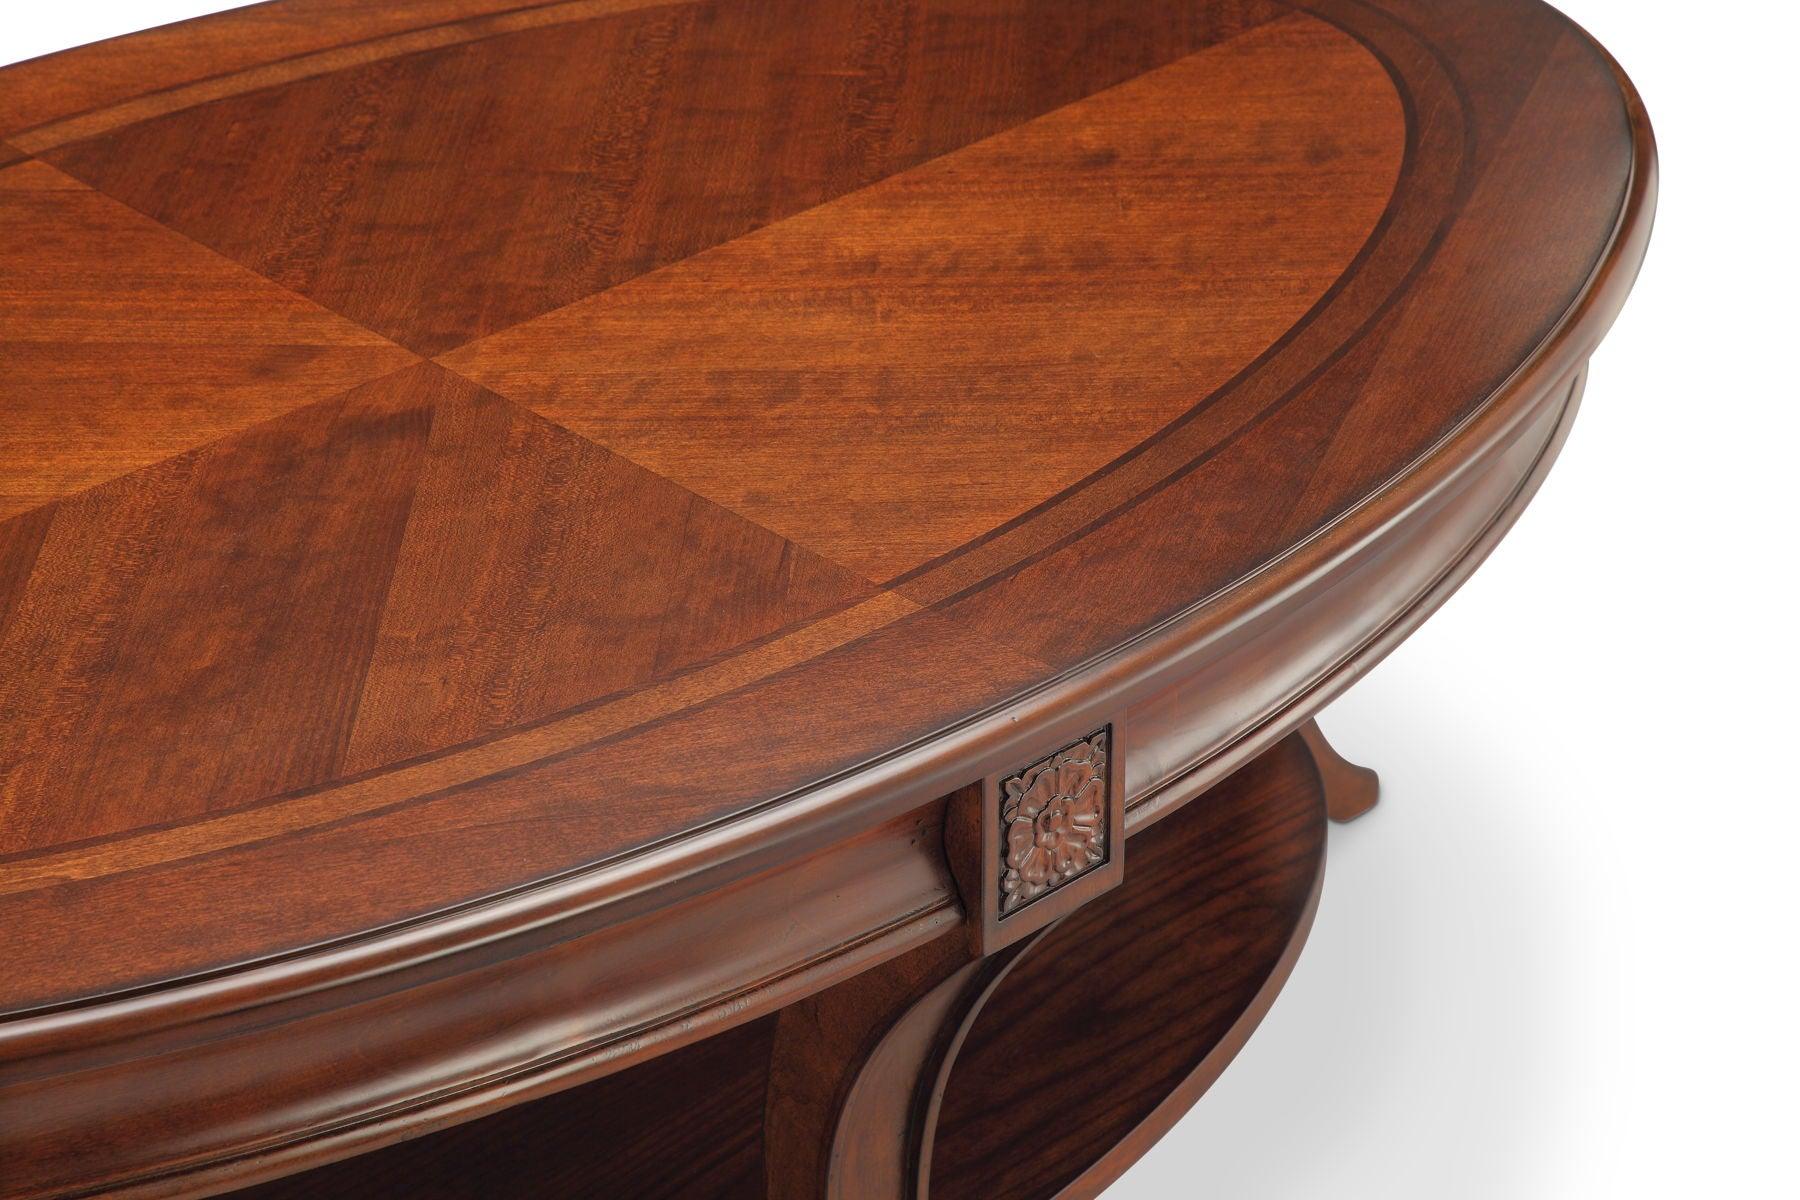 Magnussen Furniture - Winslet - Round Accent Table - Cherry - 5th Avenue Furniture